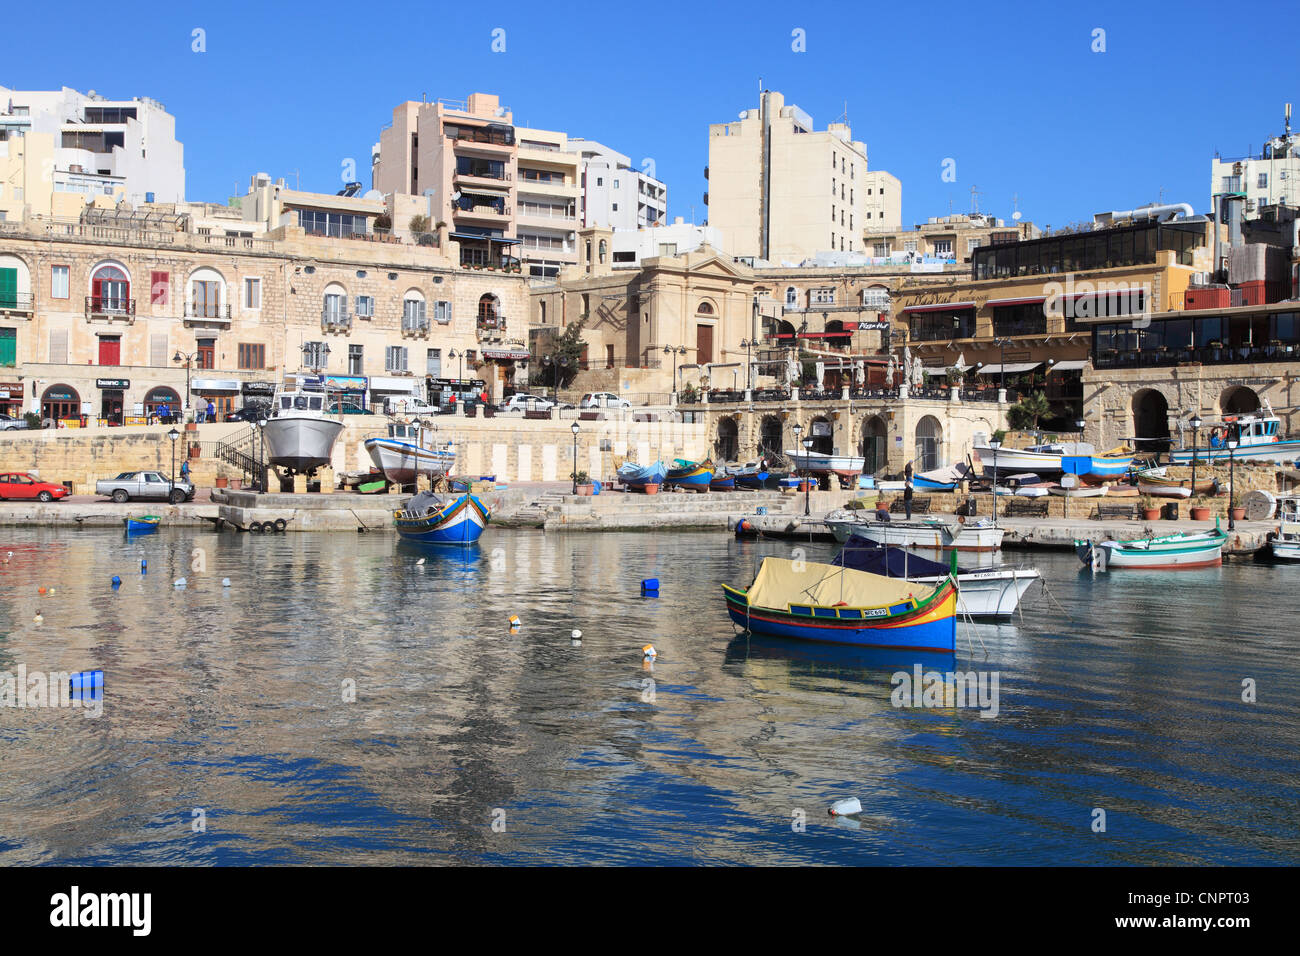 Fishing boats and historic buildings within Spinola Bay, St Julian's  Malta Europe Stock Photo